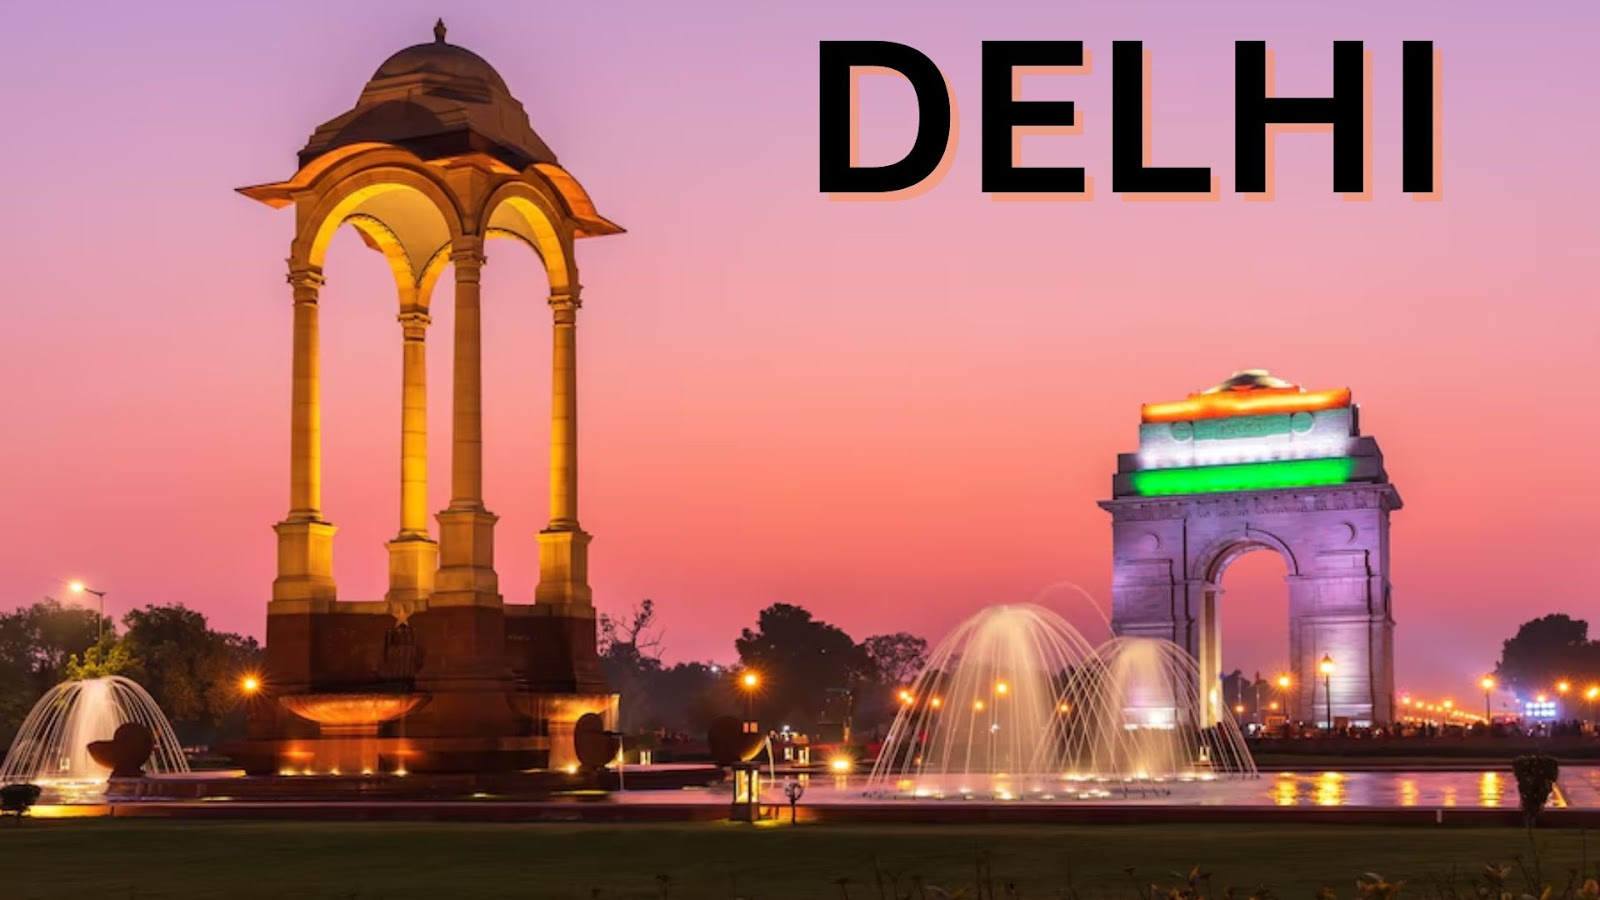 Delhi is known as India’s capital city and also an educational and real estate hub.